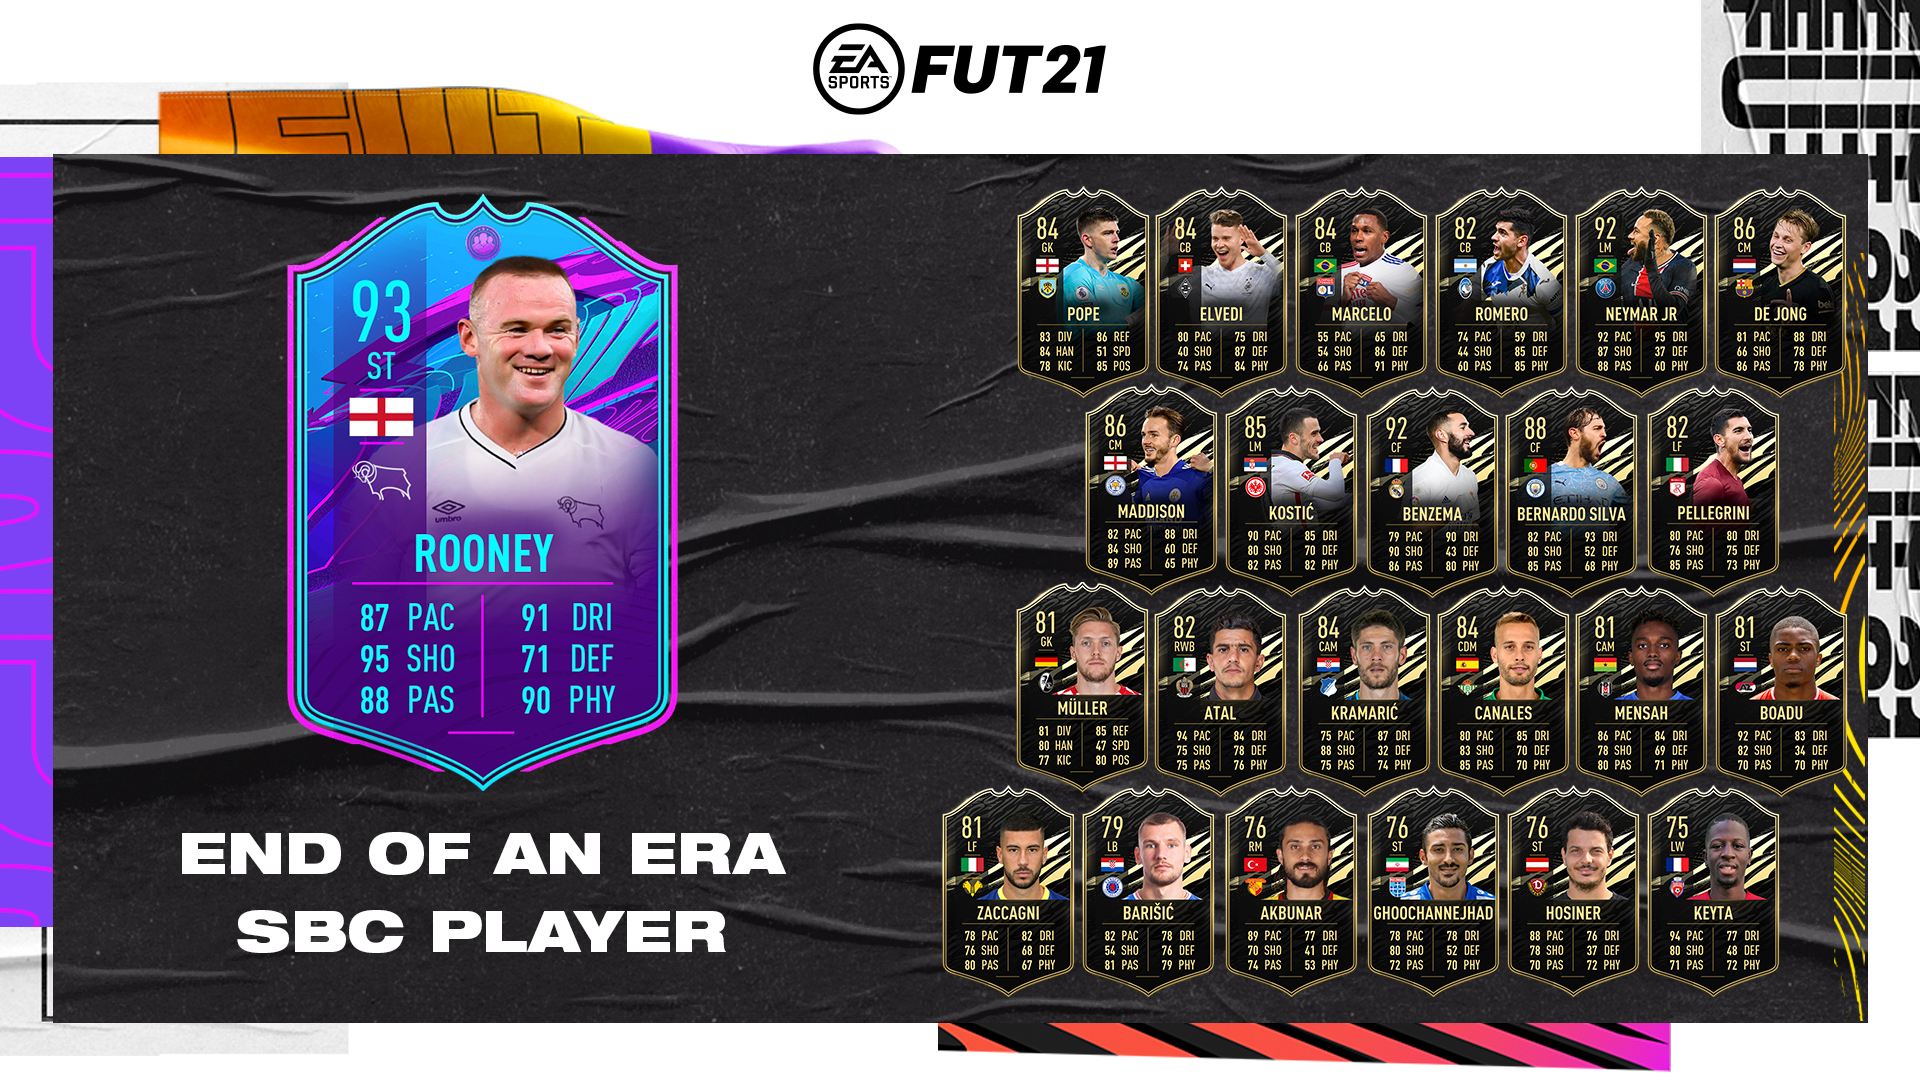 Should You Do The Wayne Rooney Premium SBC In FIFA 21? A Classic Card For A Good Price